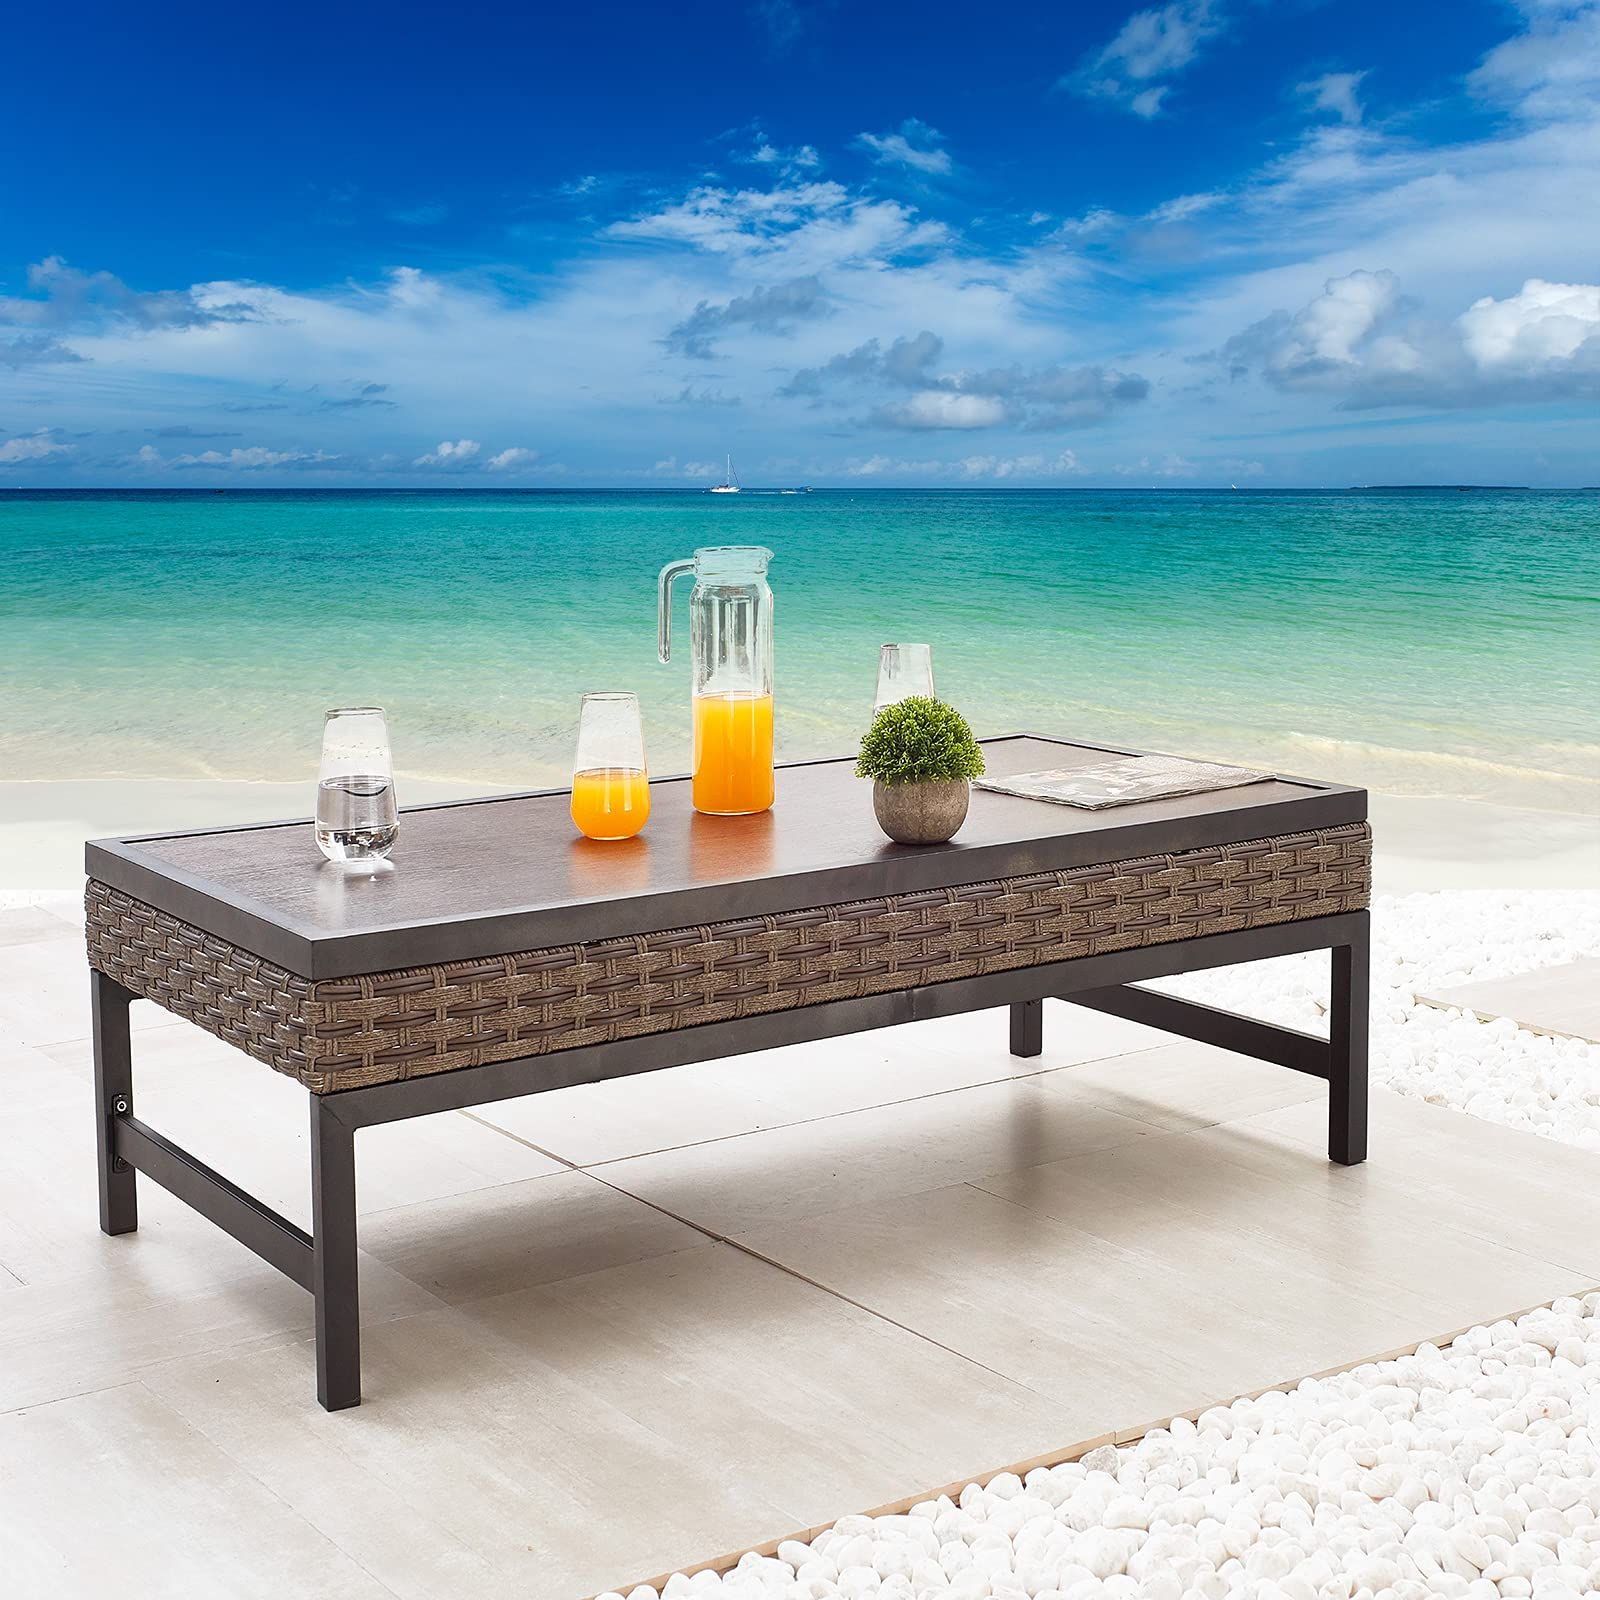 Current Natural Outdoor Cocktail Tables For Amazon: Sports Festival Patio Coffee Side Table Outdoor Furniture With  Wood Grain Tabletop, All Weather Wicker Rattan And Metal Frame For Deck  Porch Poolside Garden : Patio, Lawn & Garden (Photo 8 of 10)